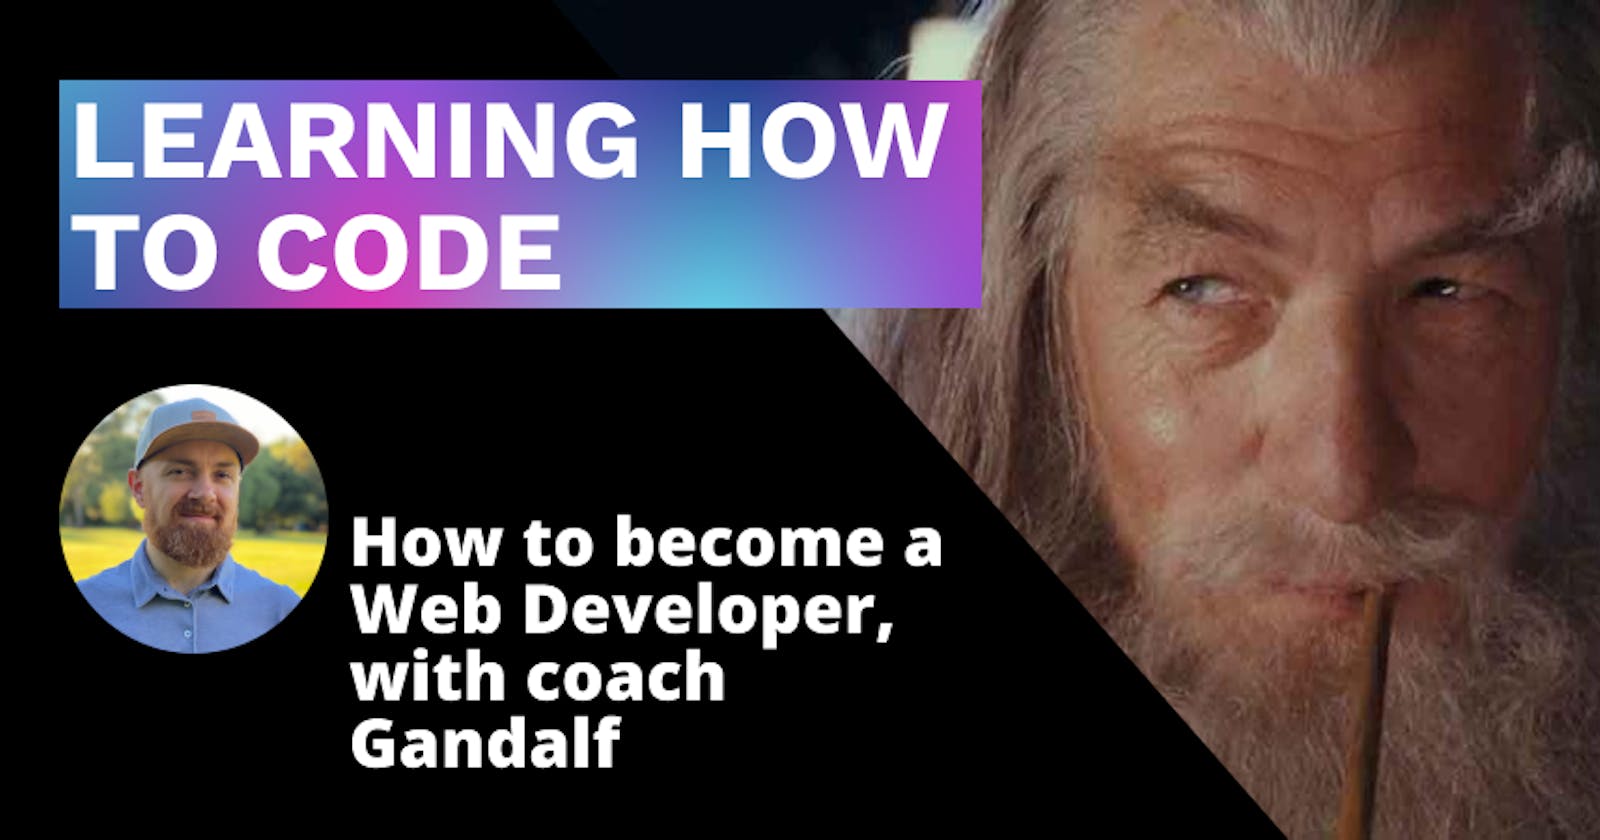 How to become a Web Developer, with coach Gandalf